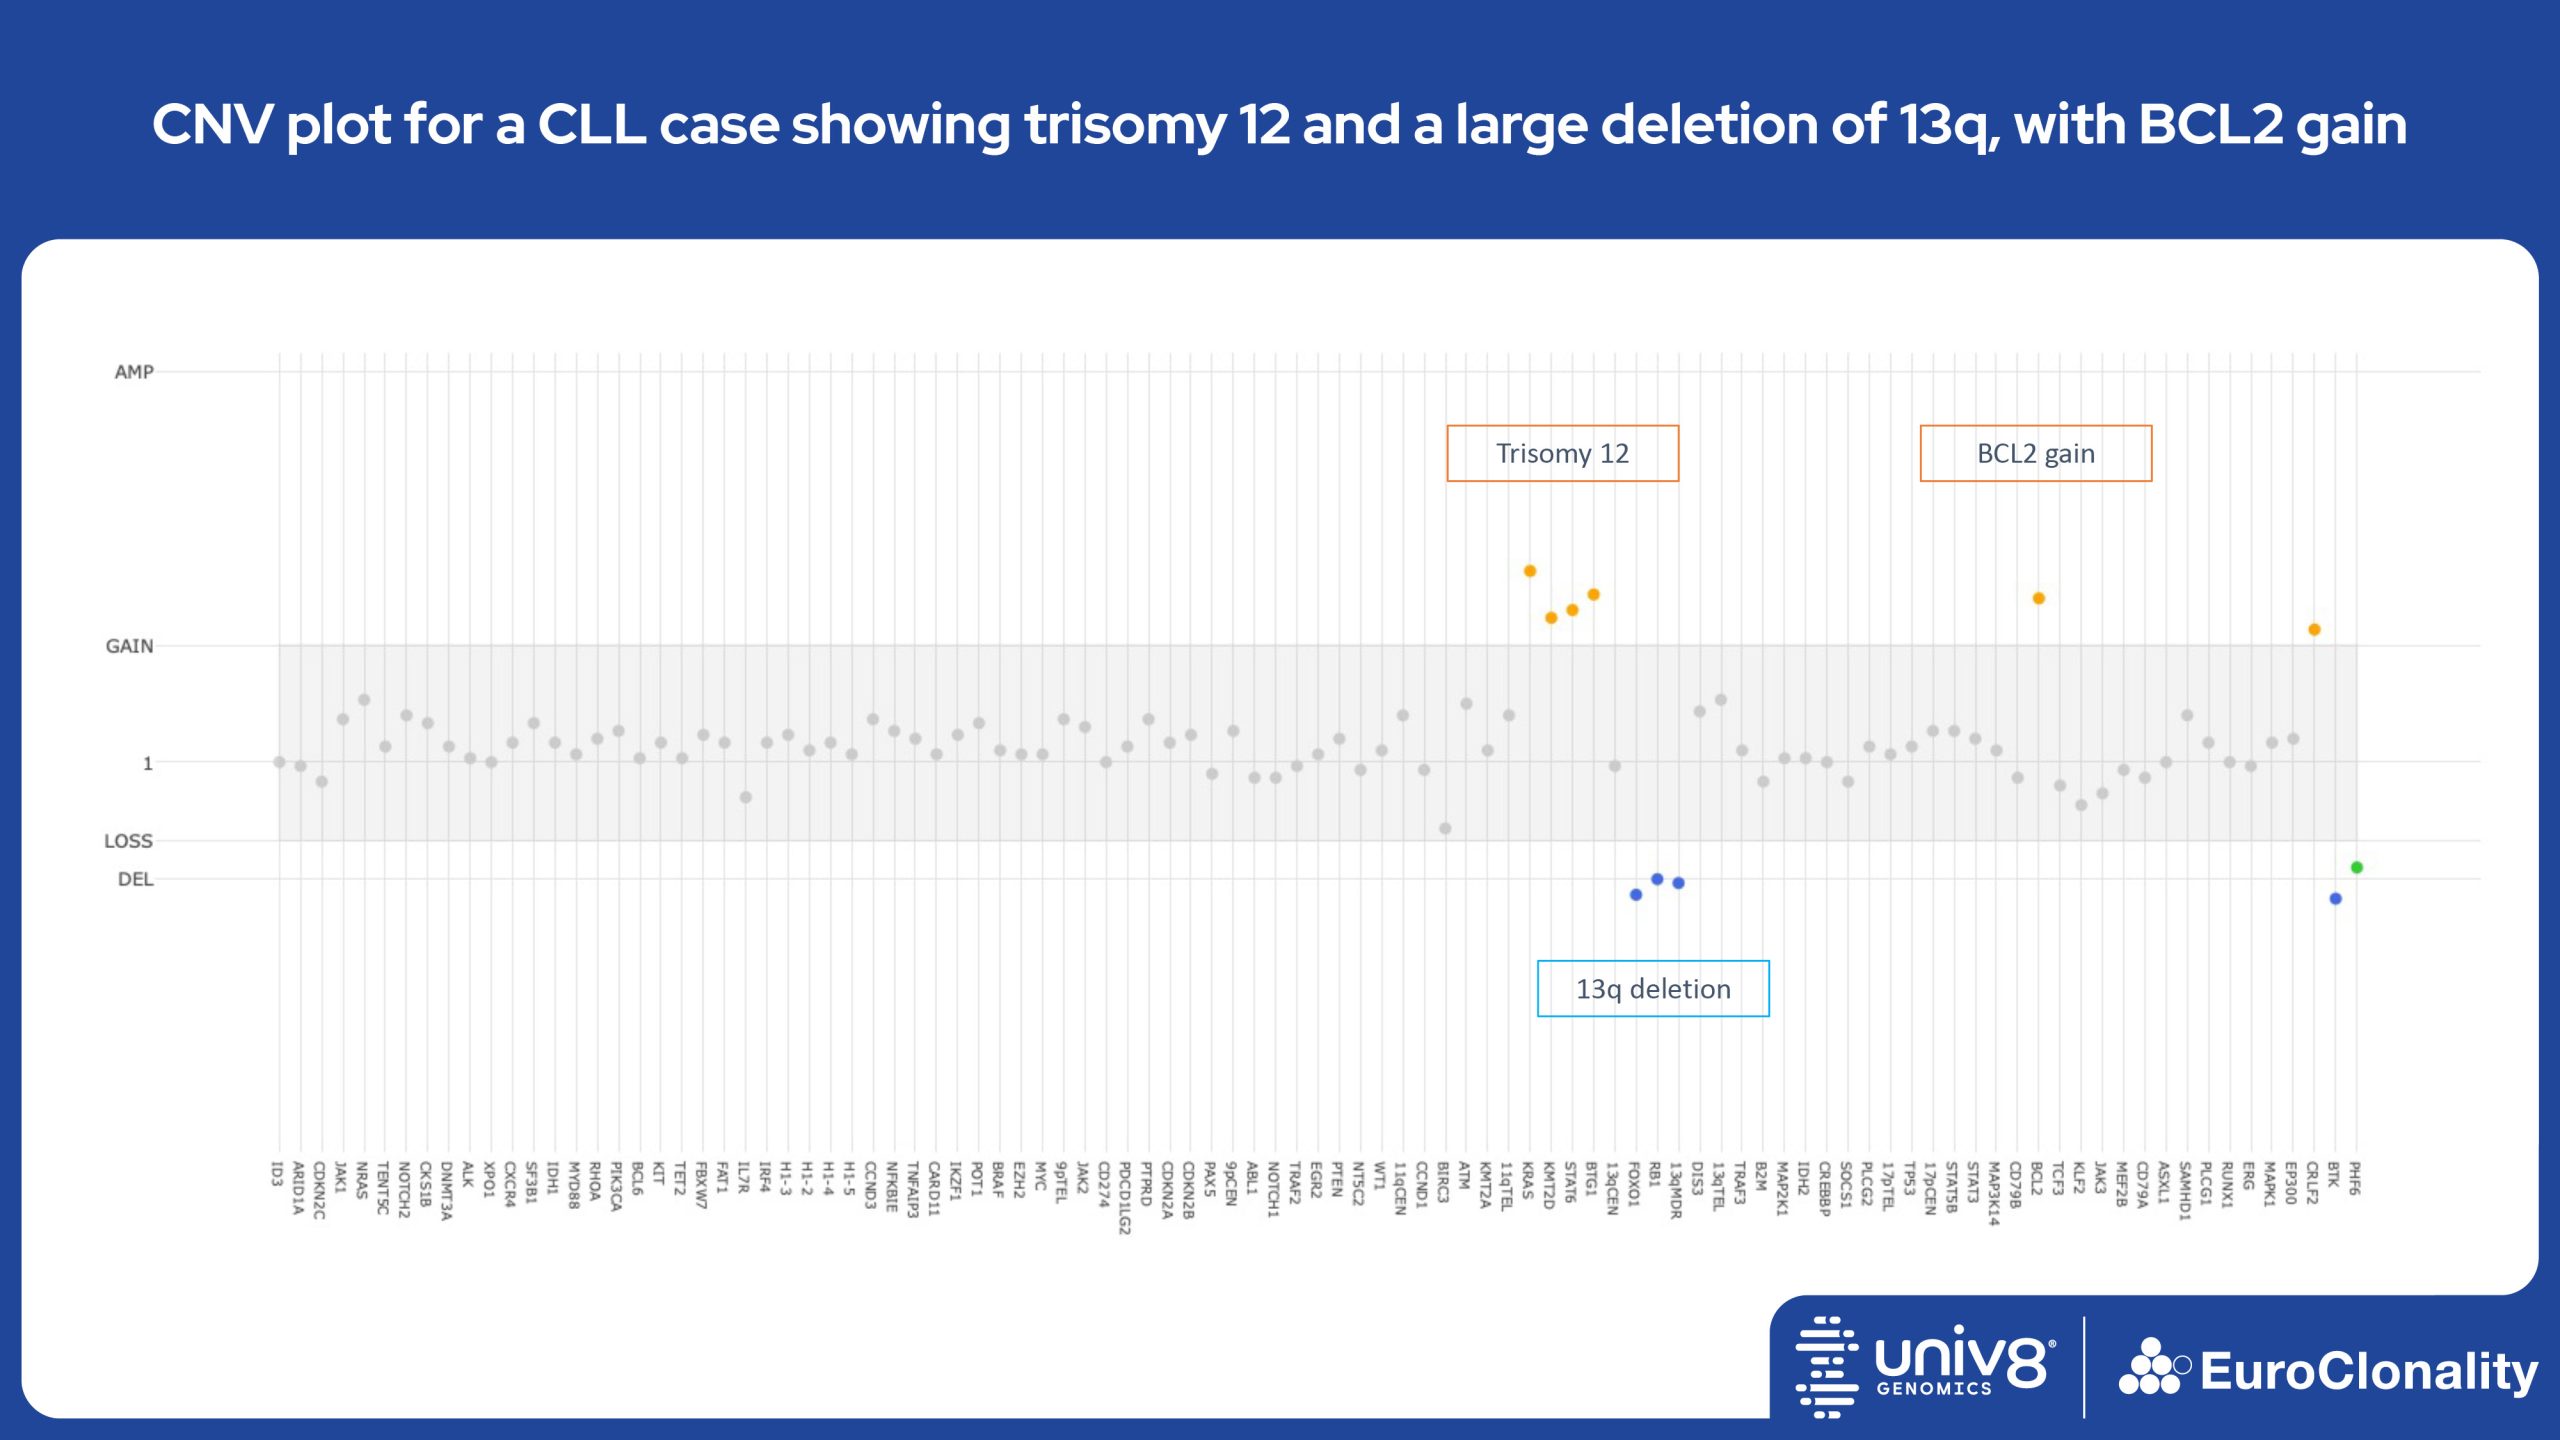 CNV plot for a CLL case showing trisomy 12 and a large deletion of 13q, with BCL2 gain